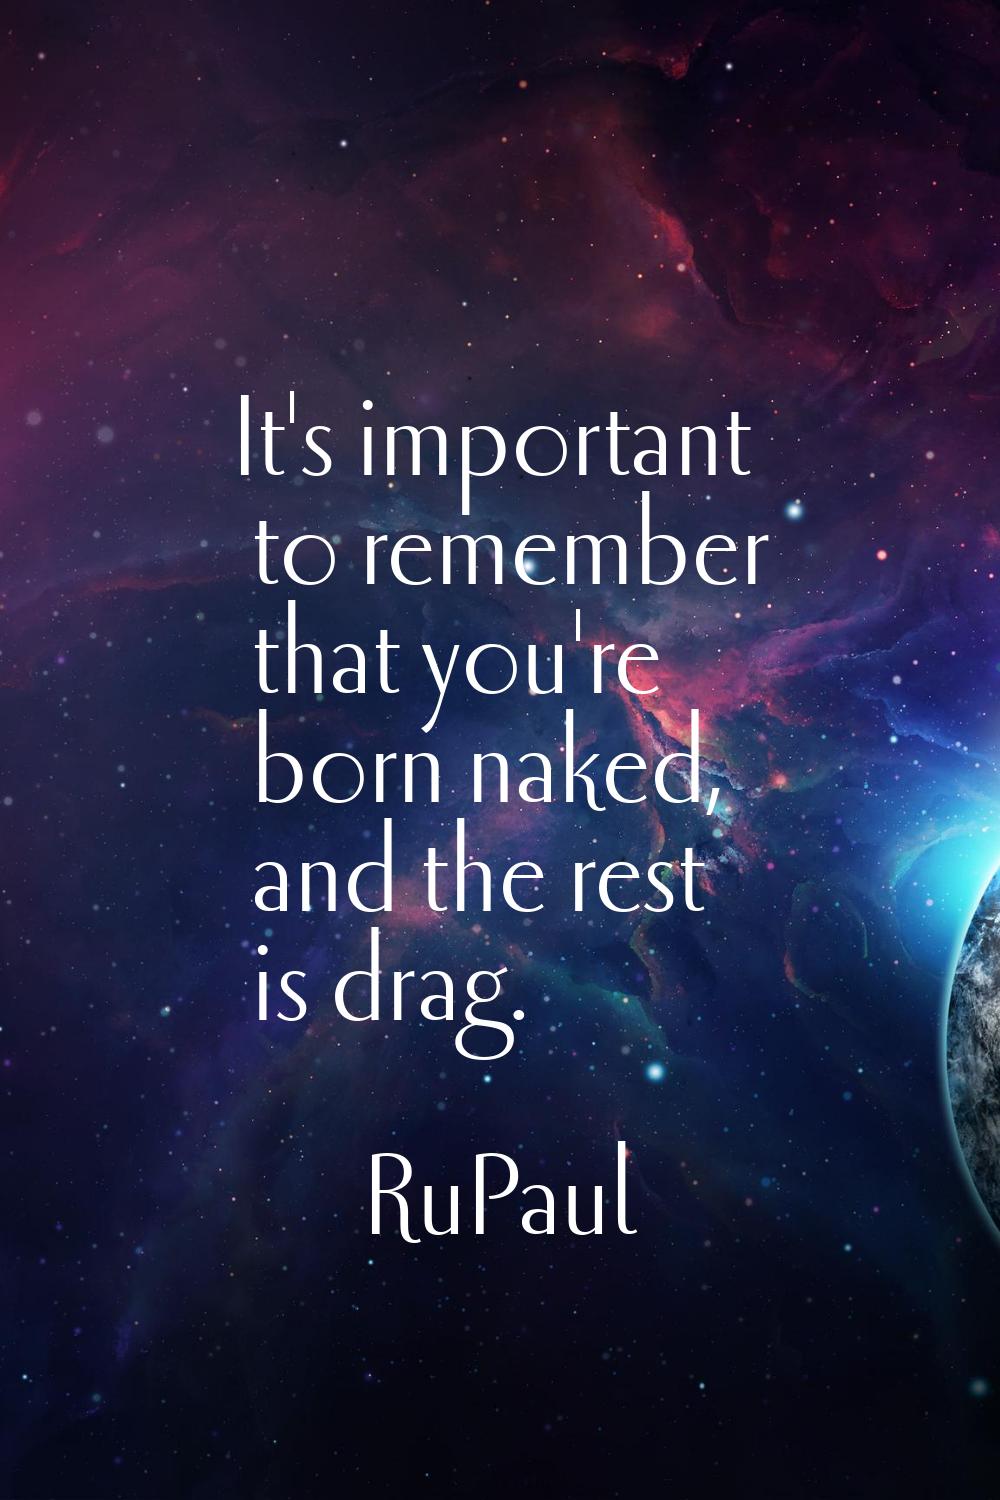 It's important to remember that you're born naked, and the rest is drag.